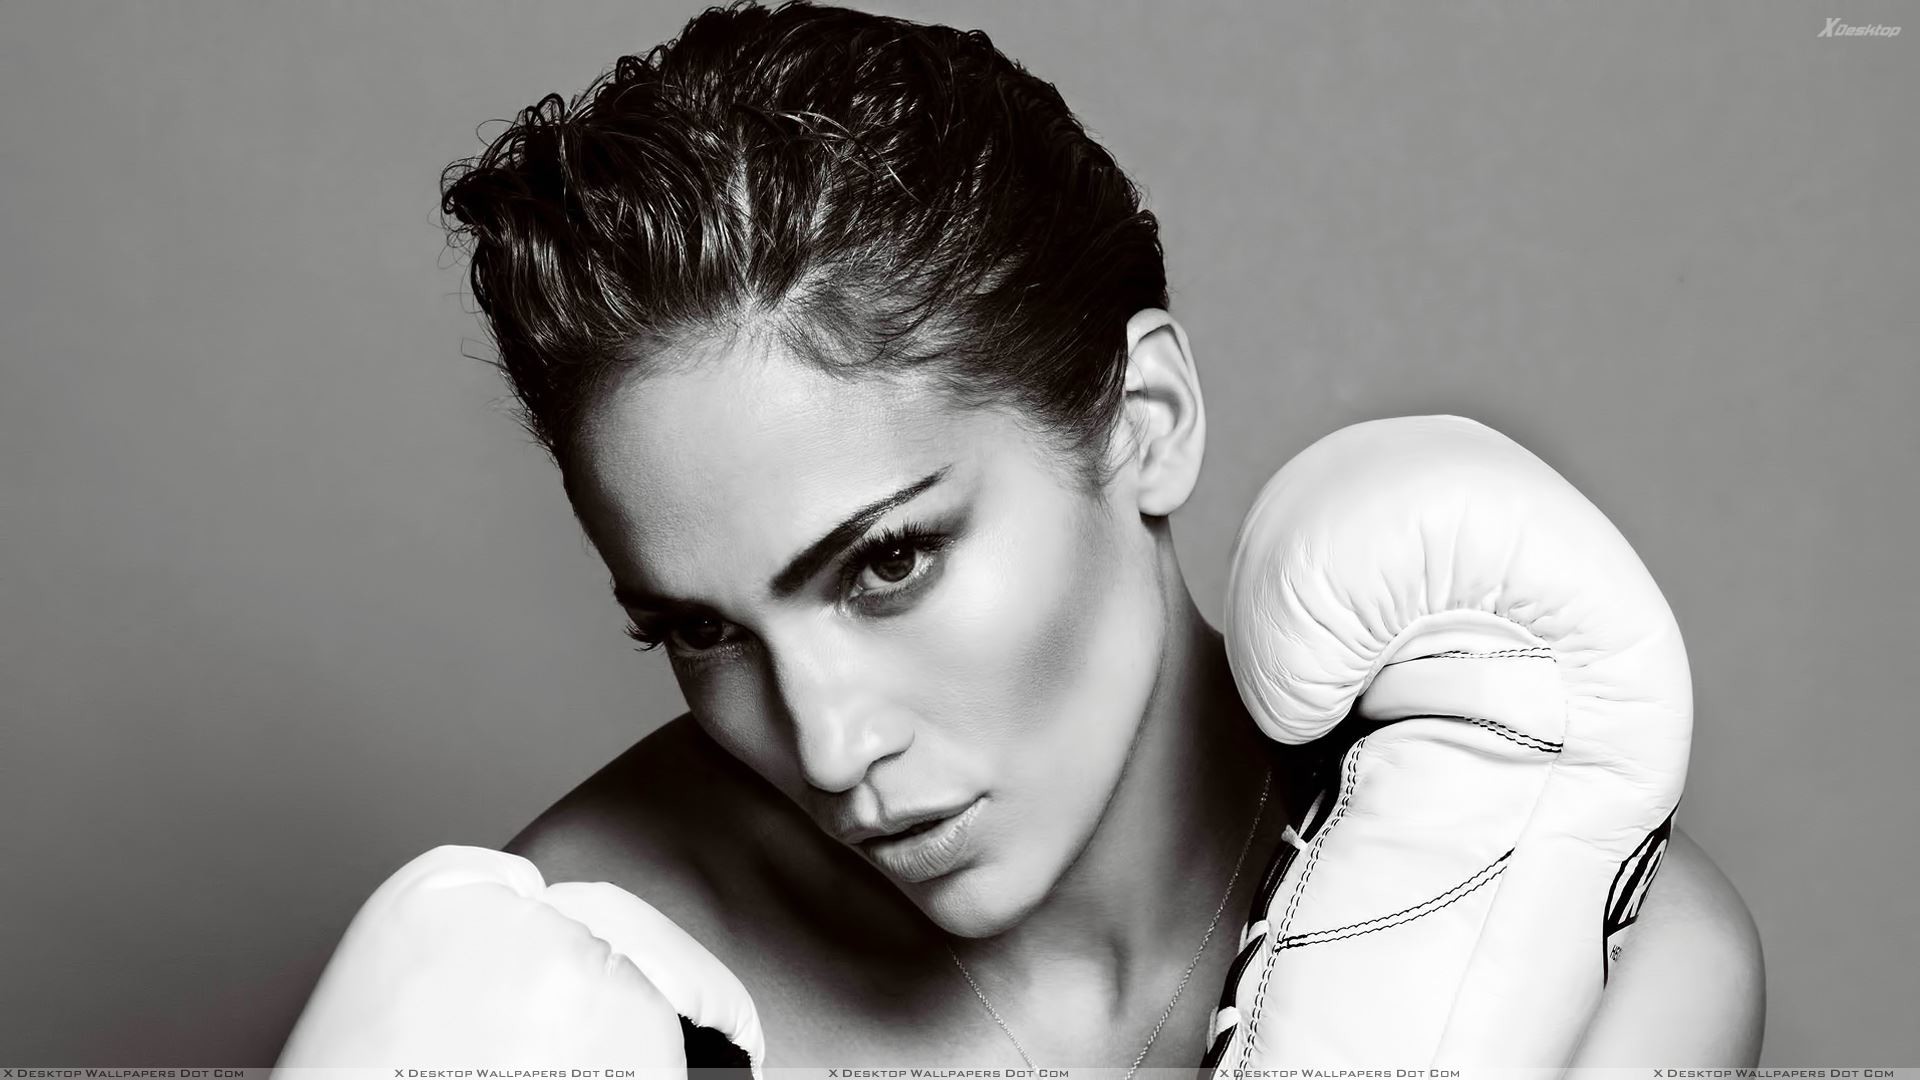 1920x1080 You are viewing wallpaper titled "Jennifer Lopez Black N White Face ...